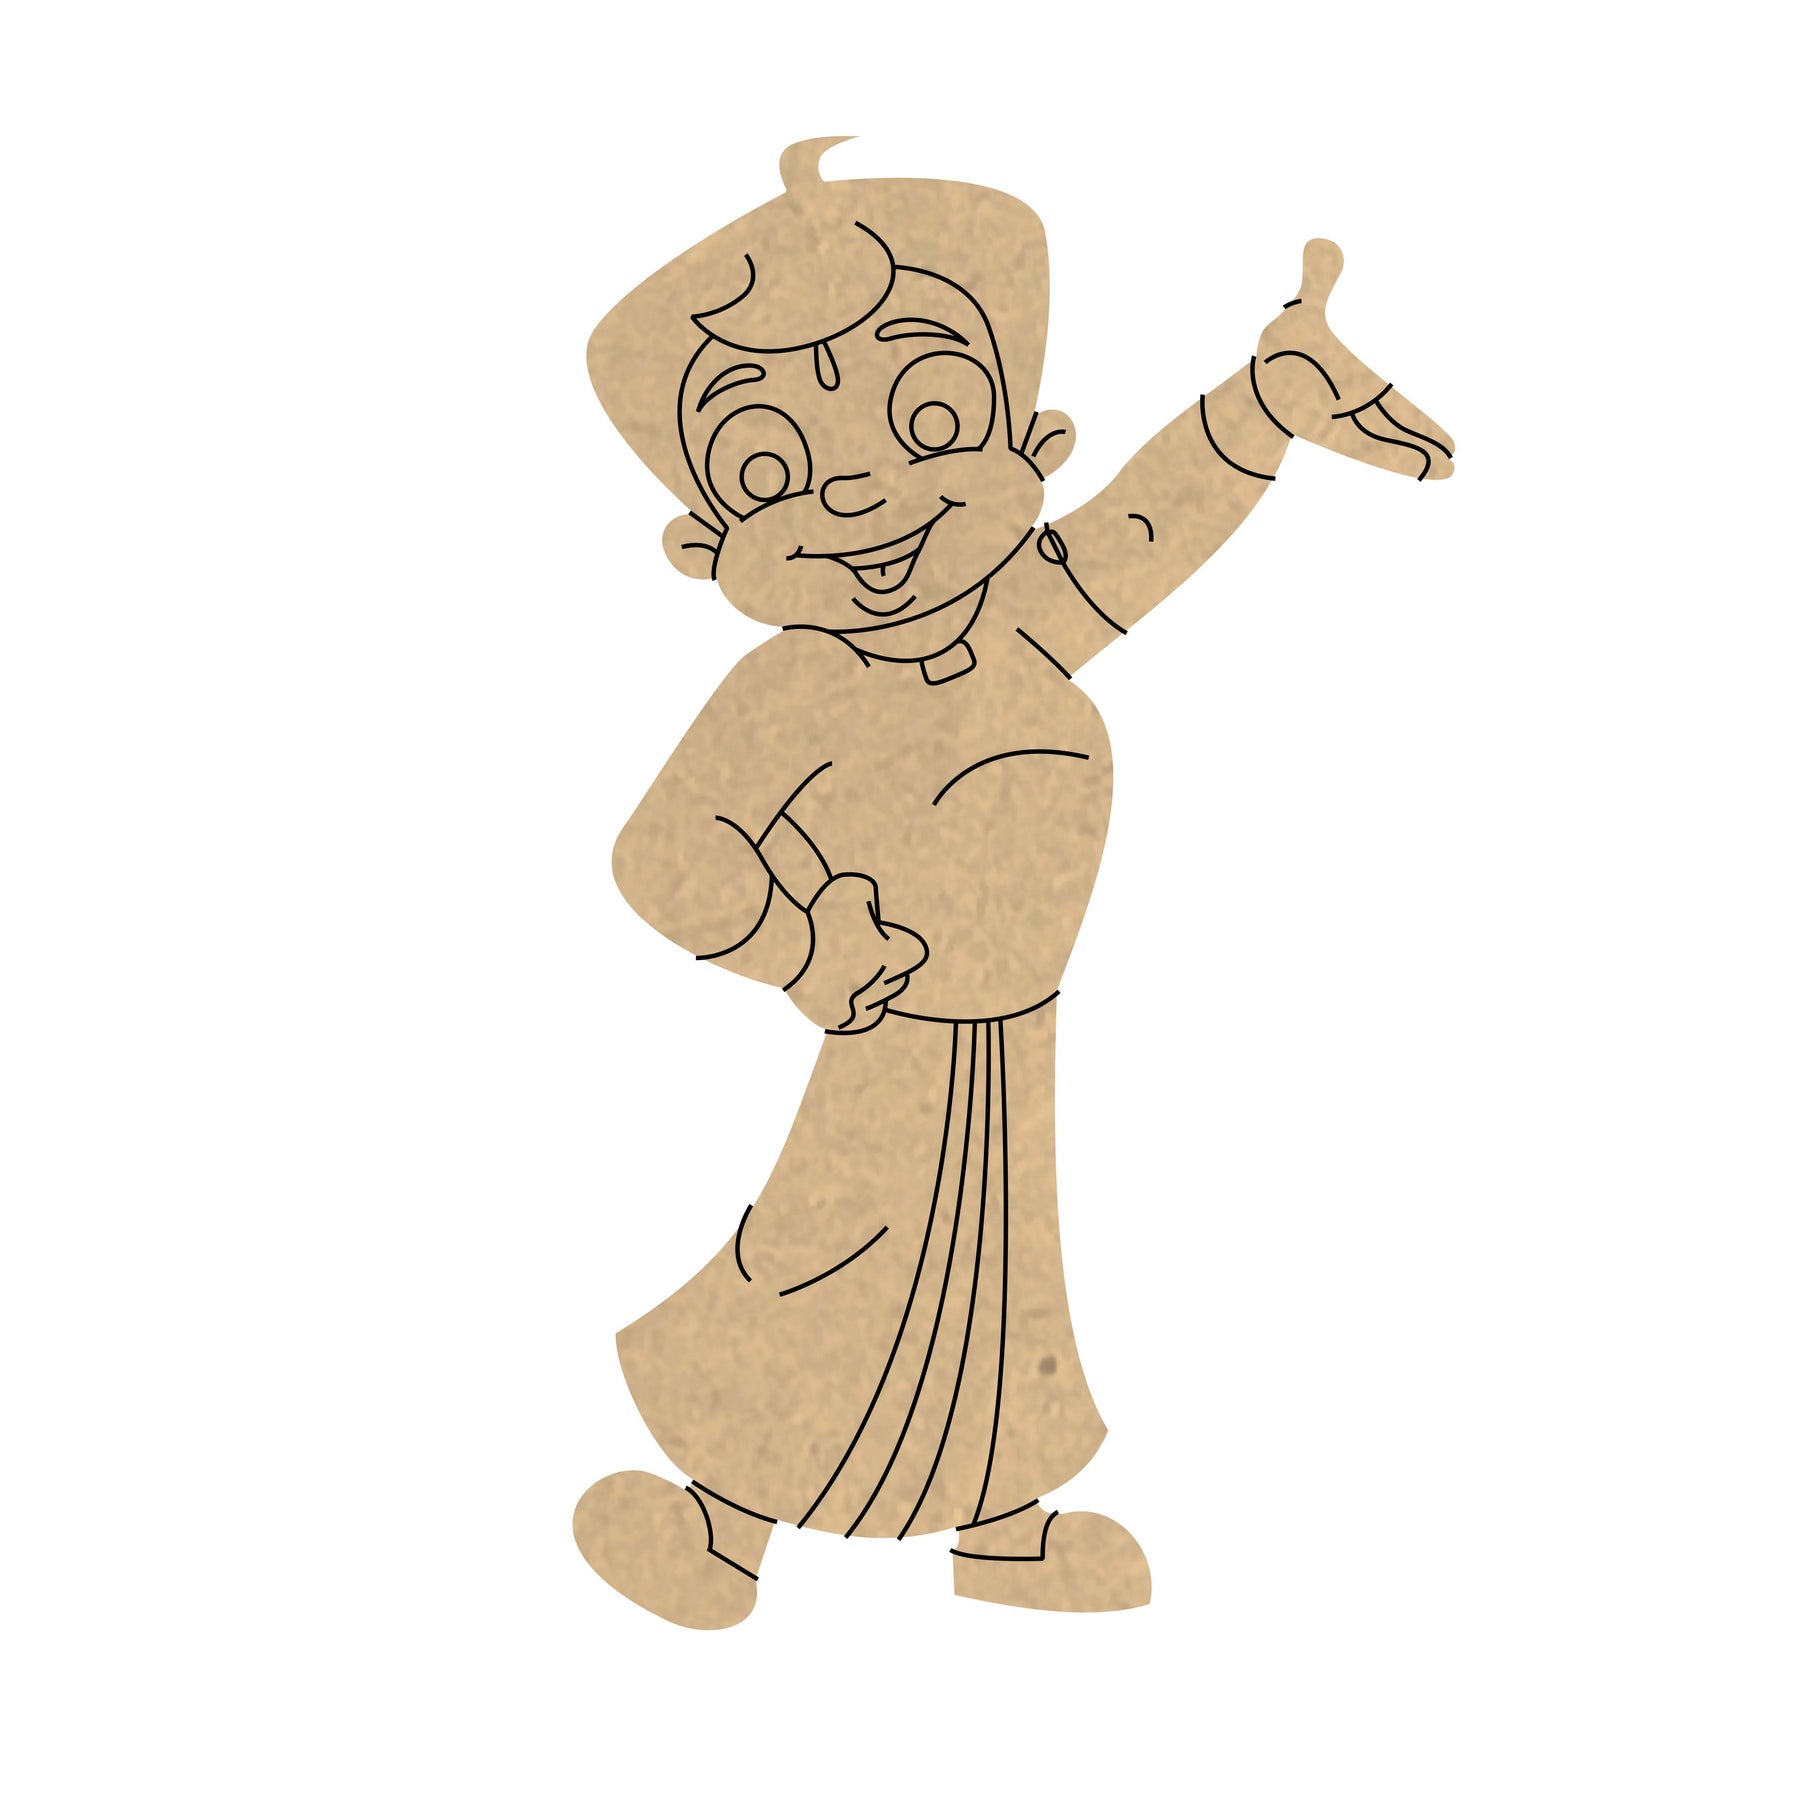 Buy chota bheem : colouring book Book Online at Low Prices in India | chota  bheem : colouring book Reviews & Ratings - Amazon.in